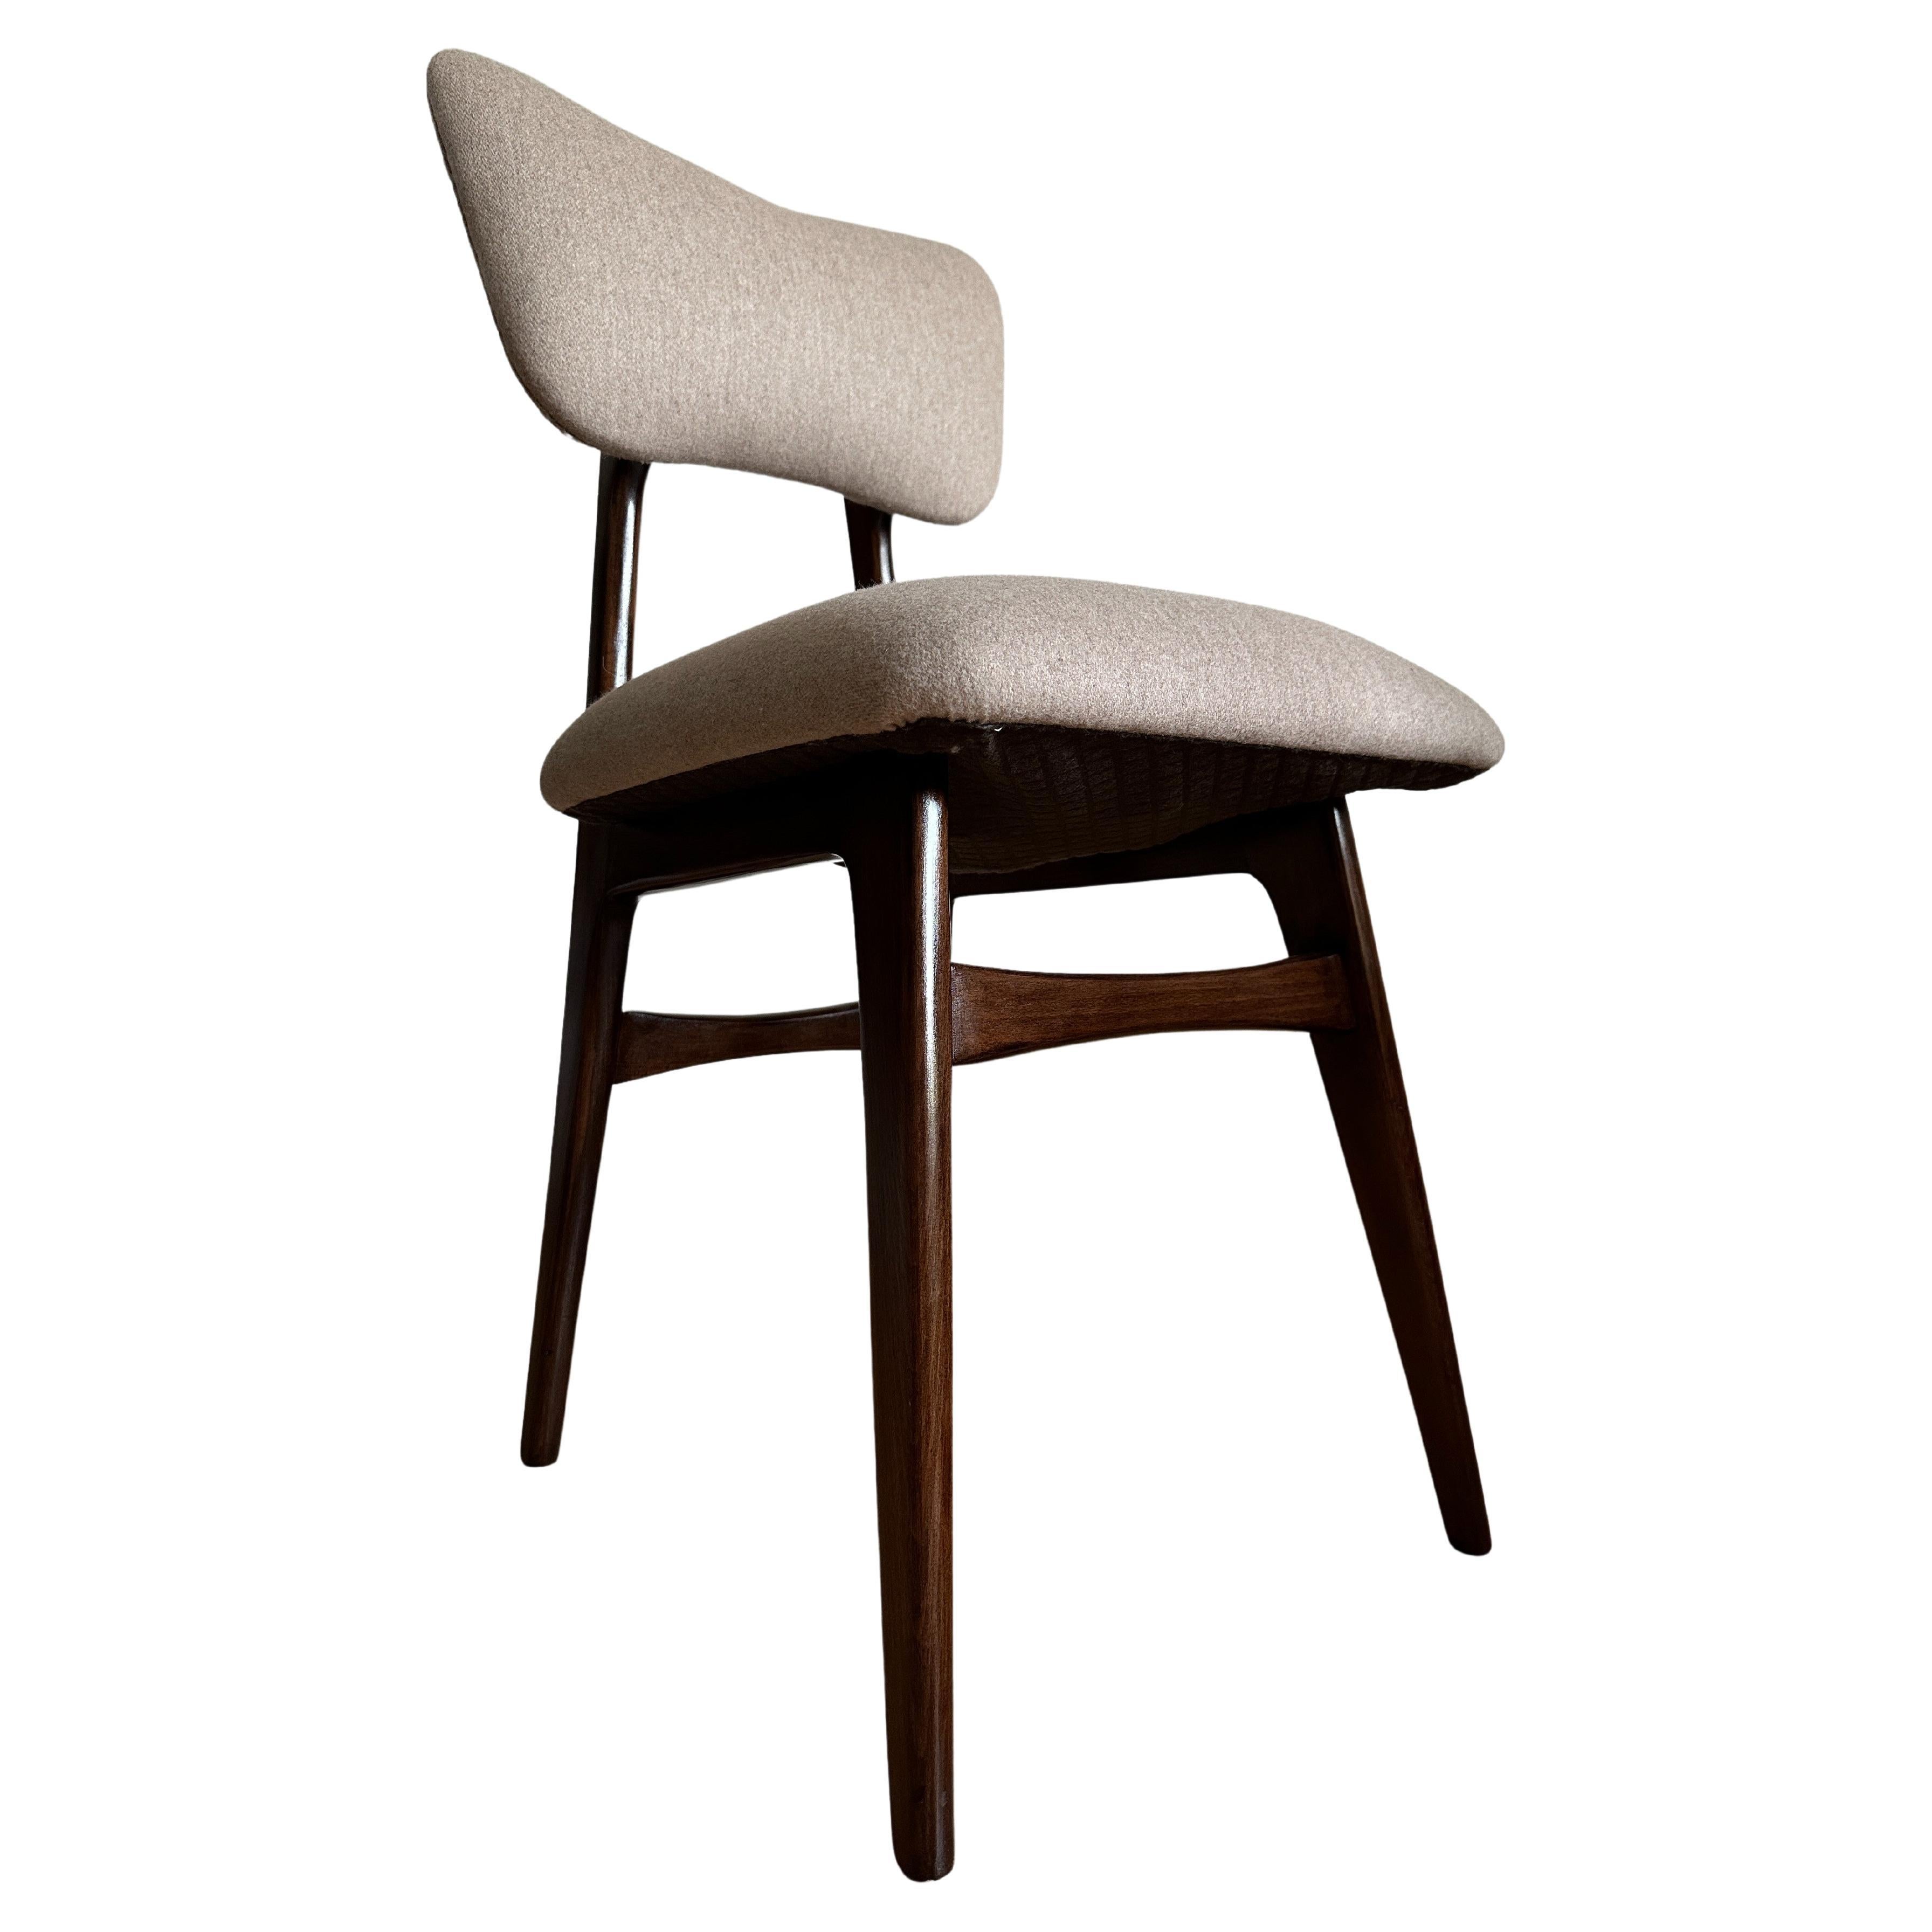 Midcentury Dining Chair in Beige Wool Upholstery, Poland, 1960s For Sale